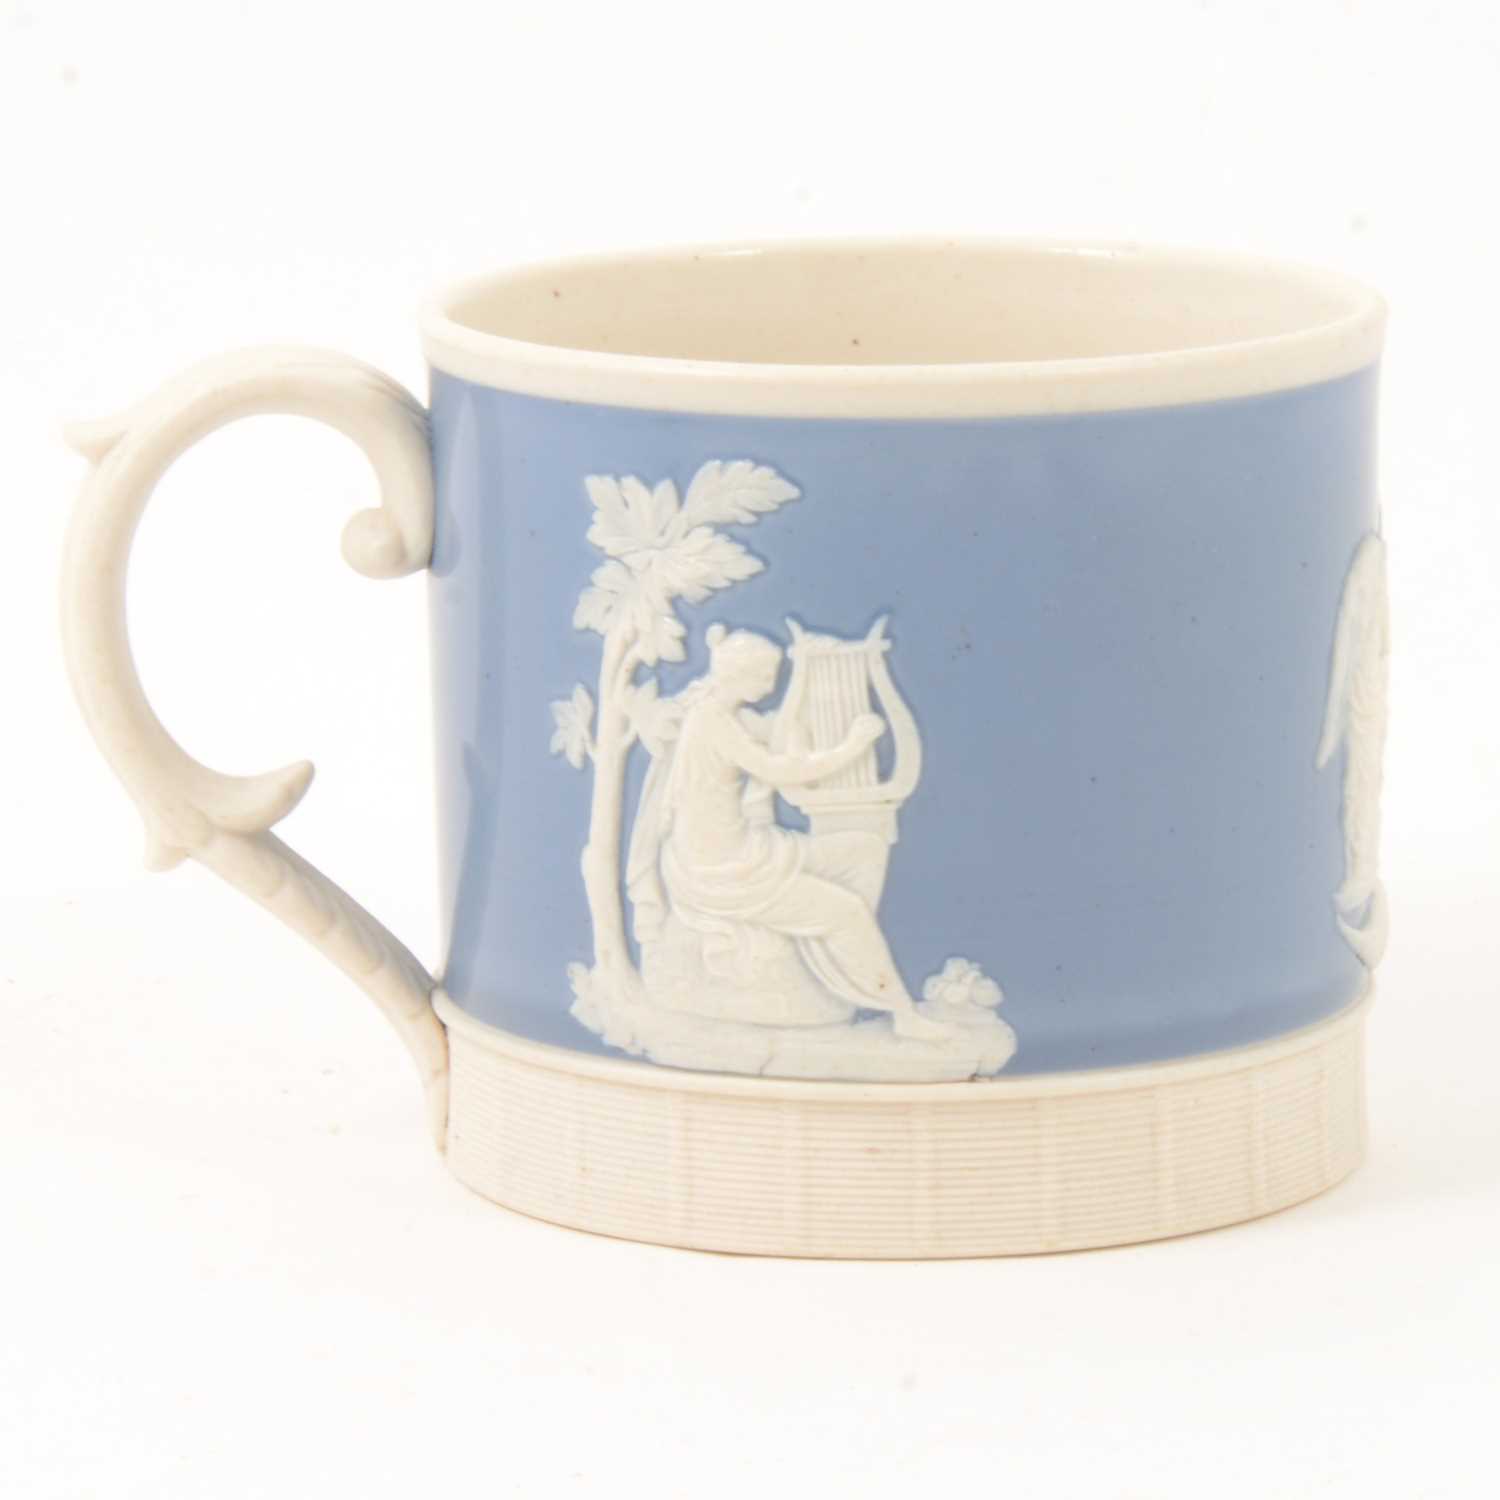 Lot 81 - Staffordshire stoneware memorial mug, commemorating Admirals Howe and Nelson.